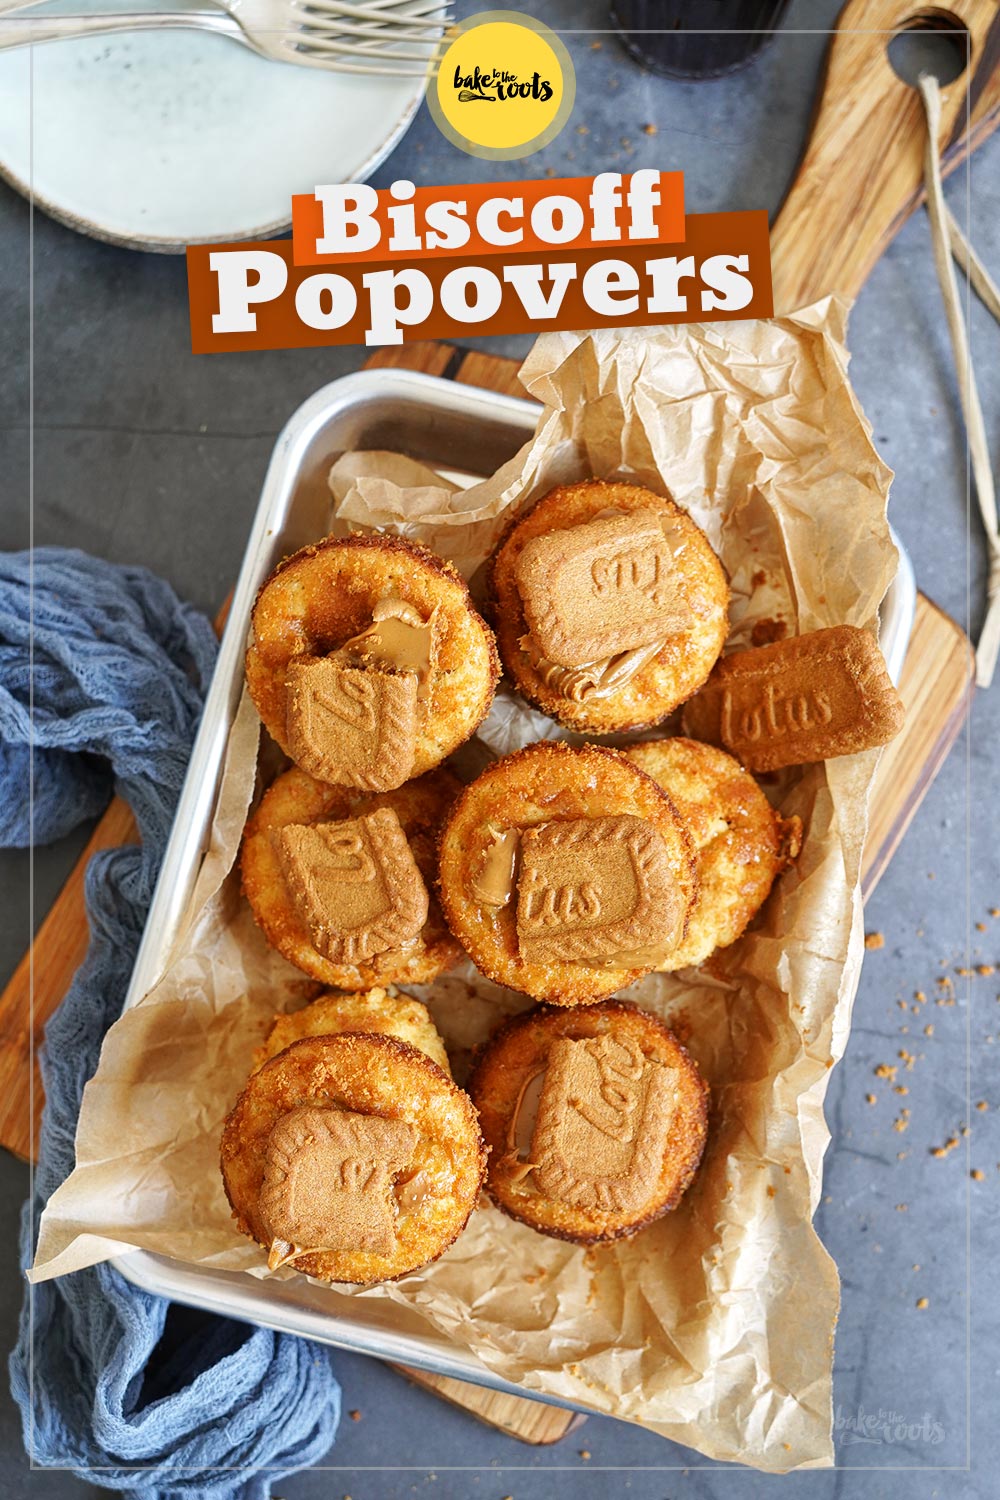 Biscoff Popovers | Bake to the roots